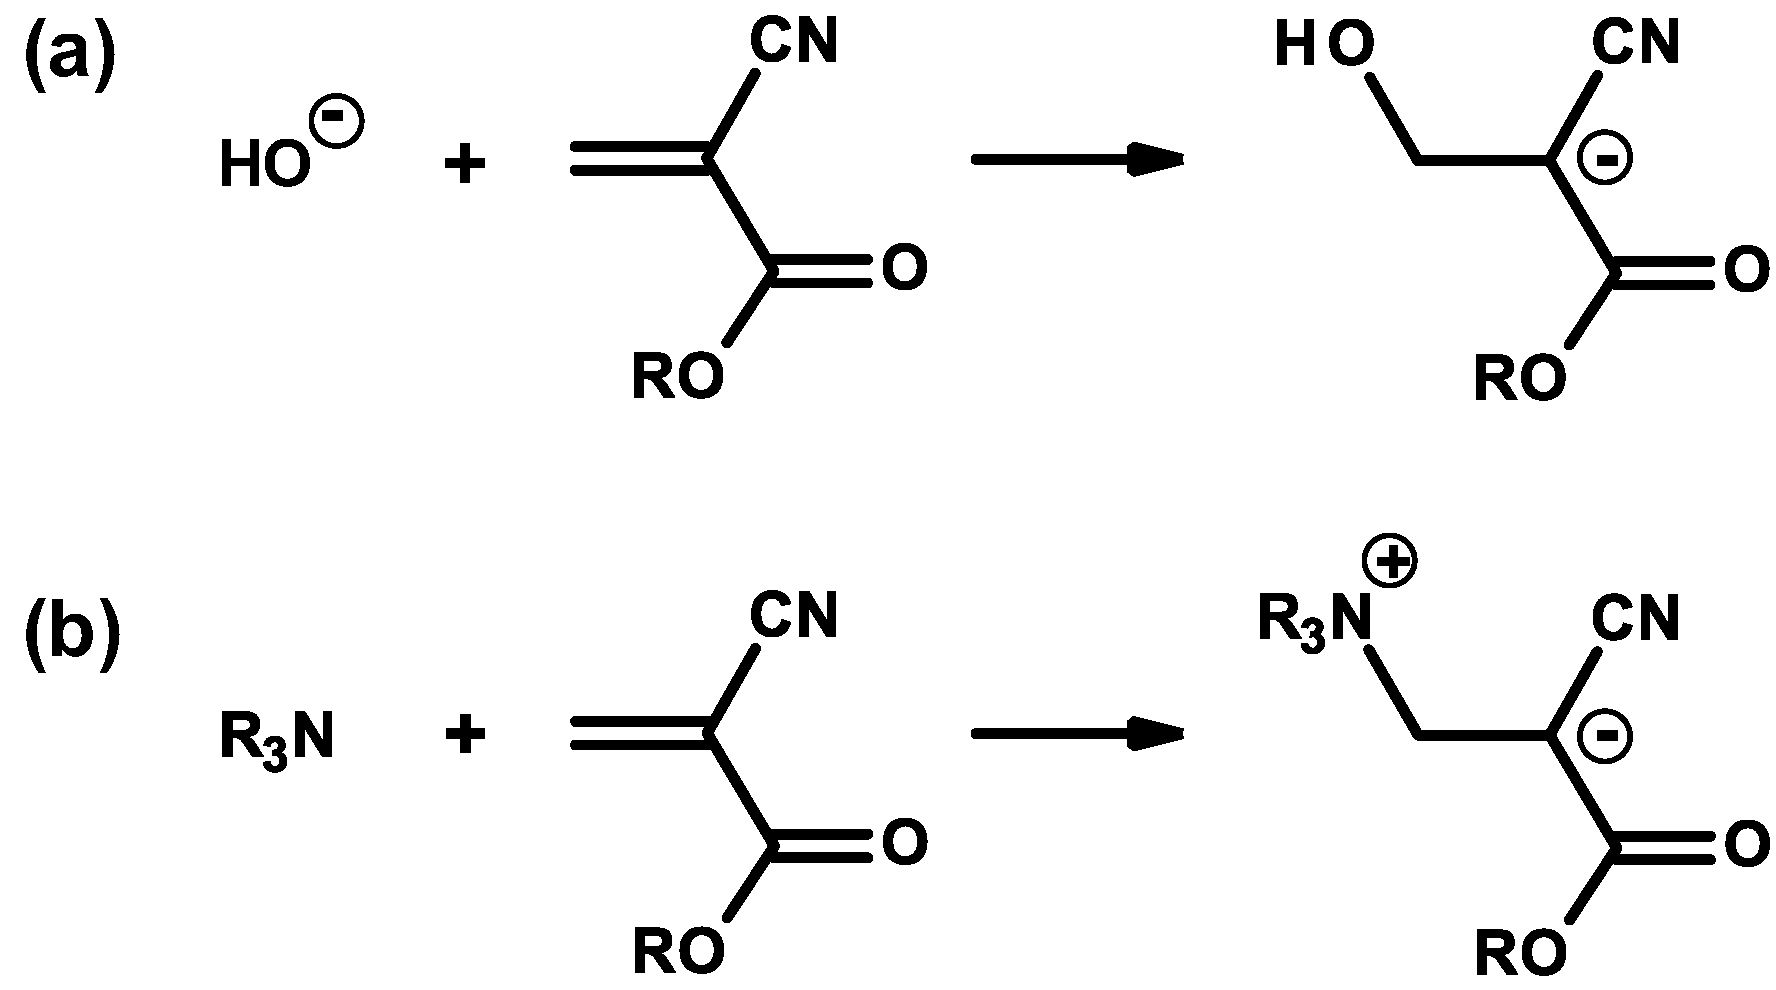 Molecular structure of cyanoacrylate and the polymerization process